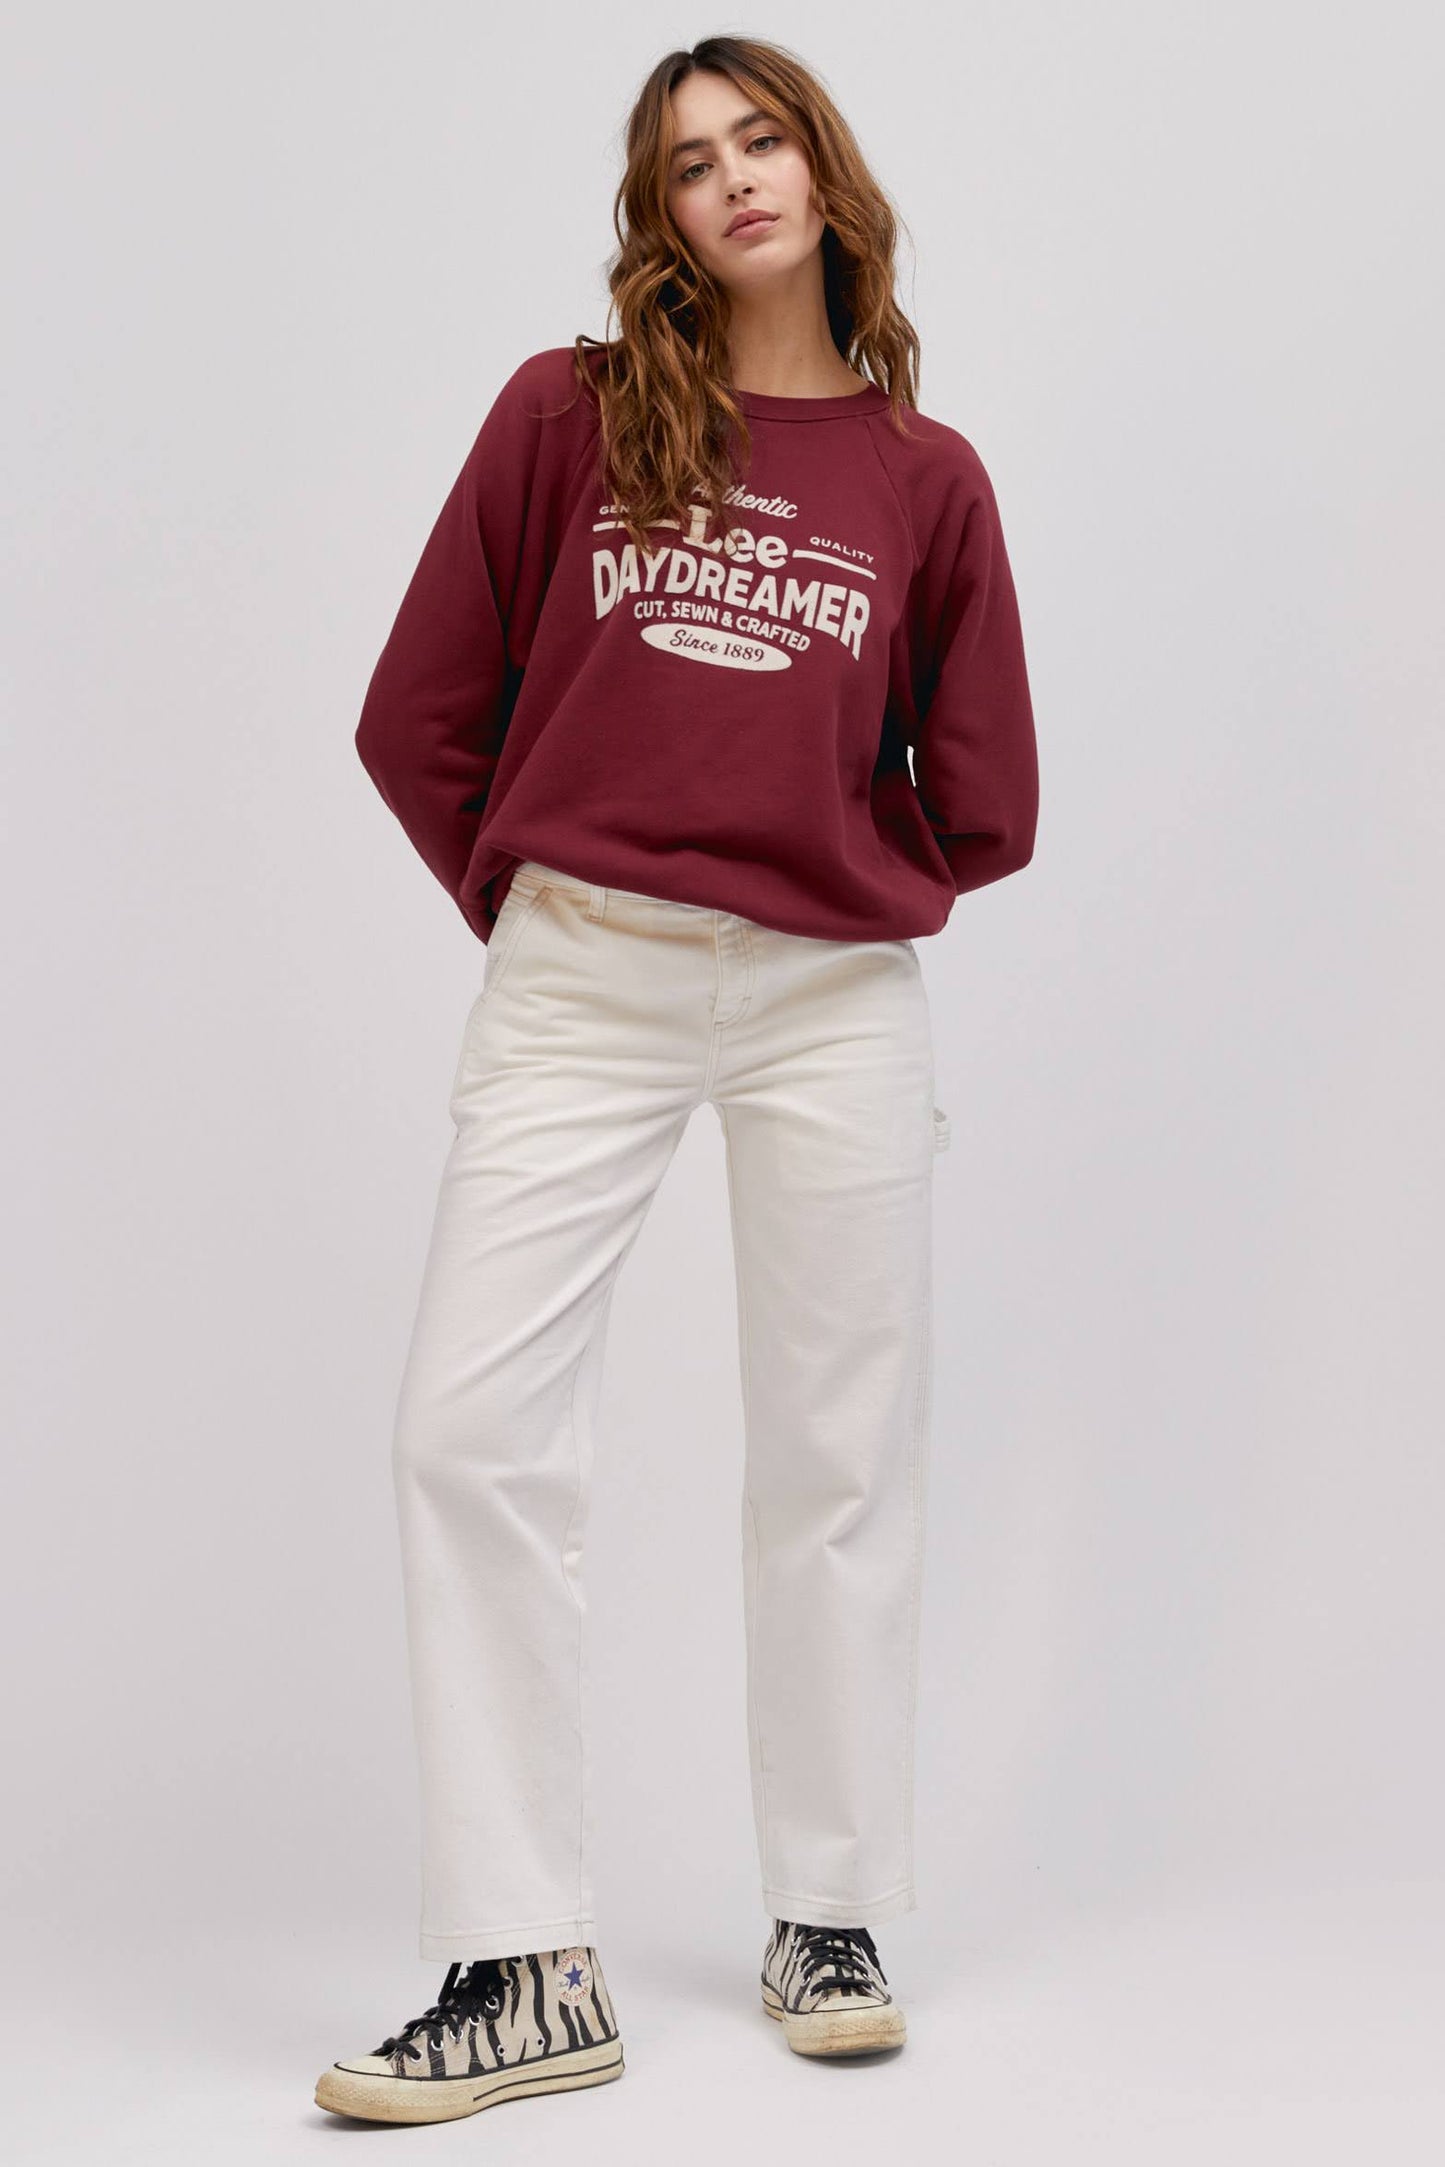 long wavy haired model in standing pose wearing maroon colored sweatshirt and white workwear pants